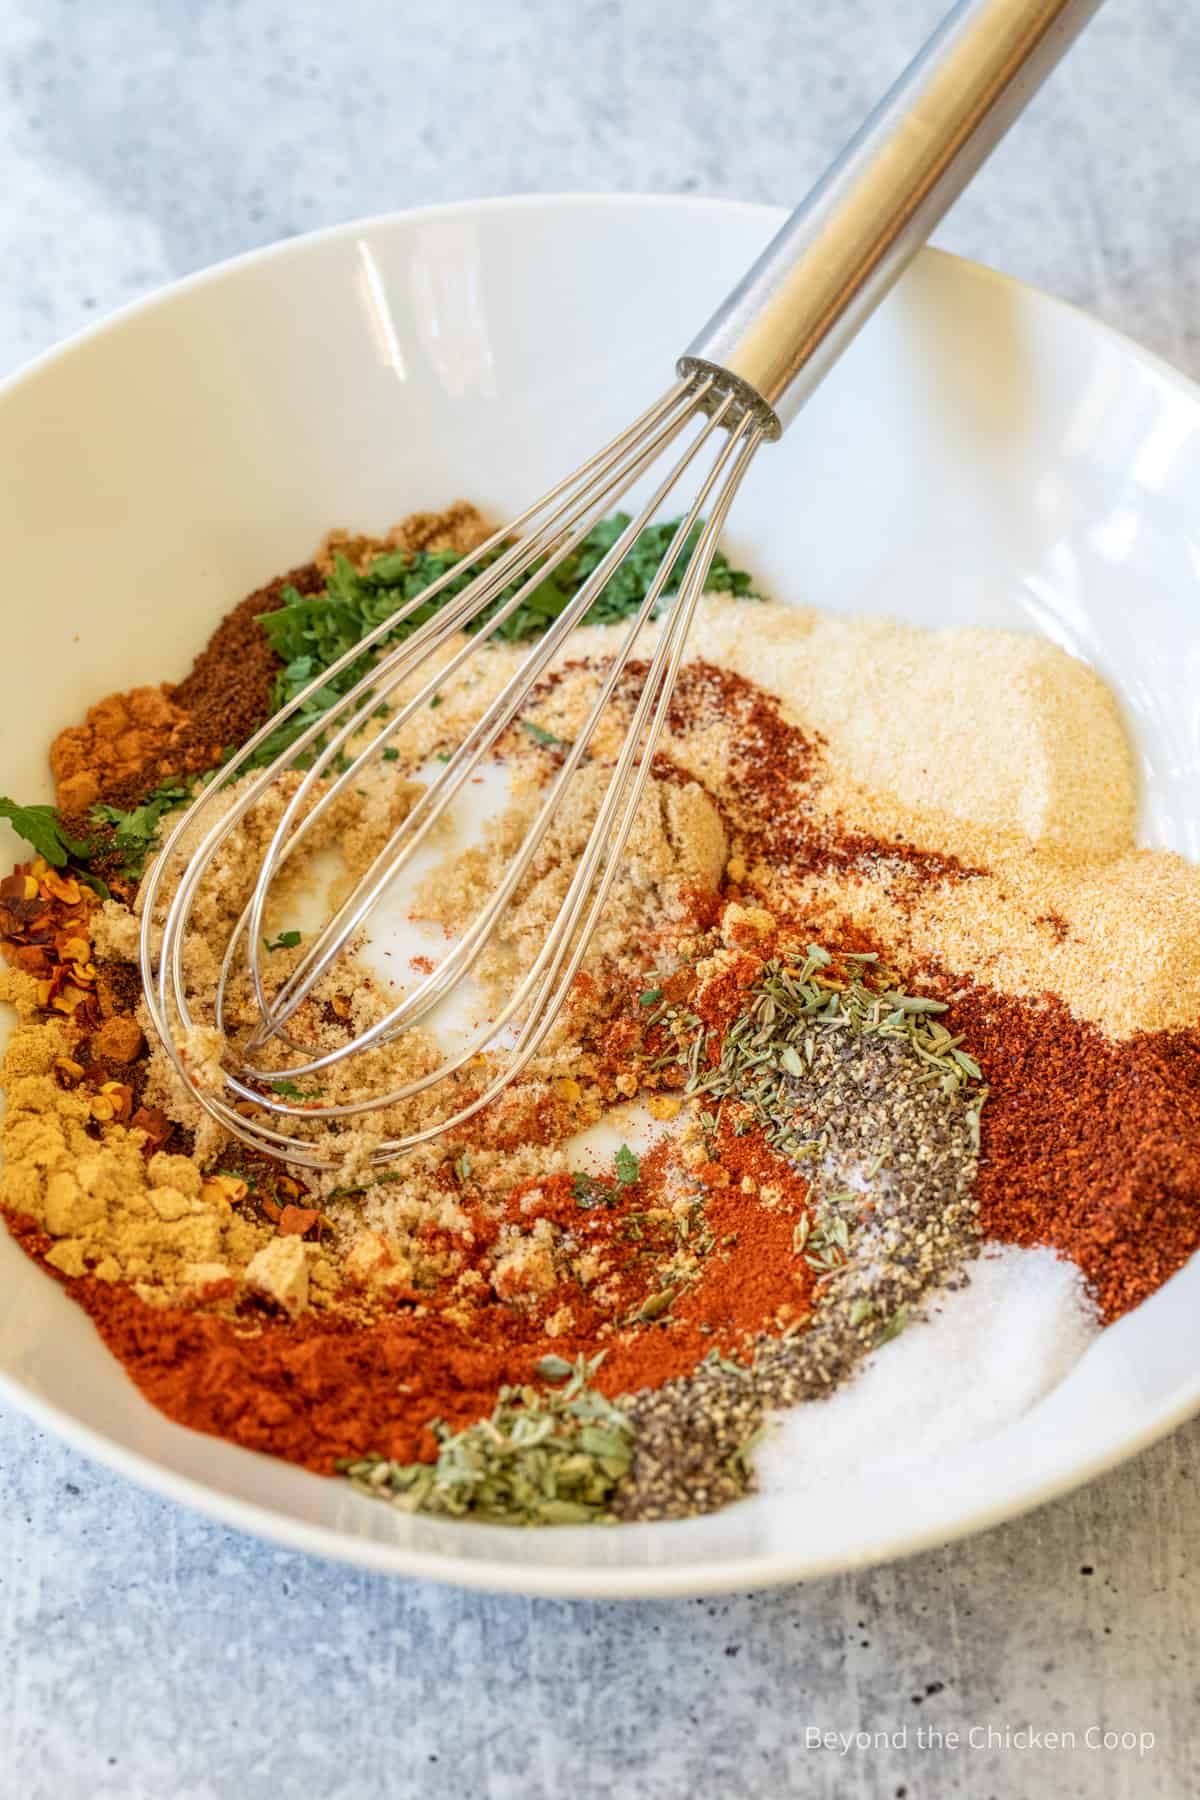 Swirling spices together in a bowl with a whisk.